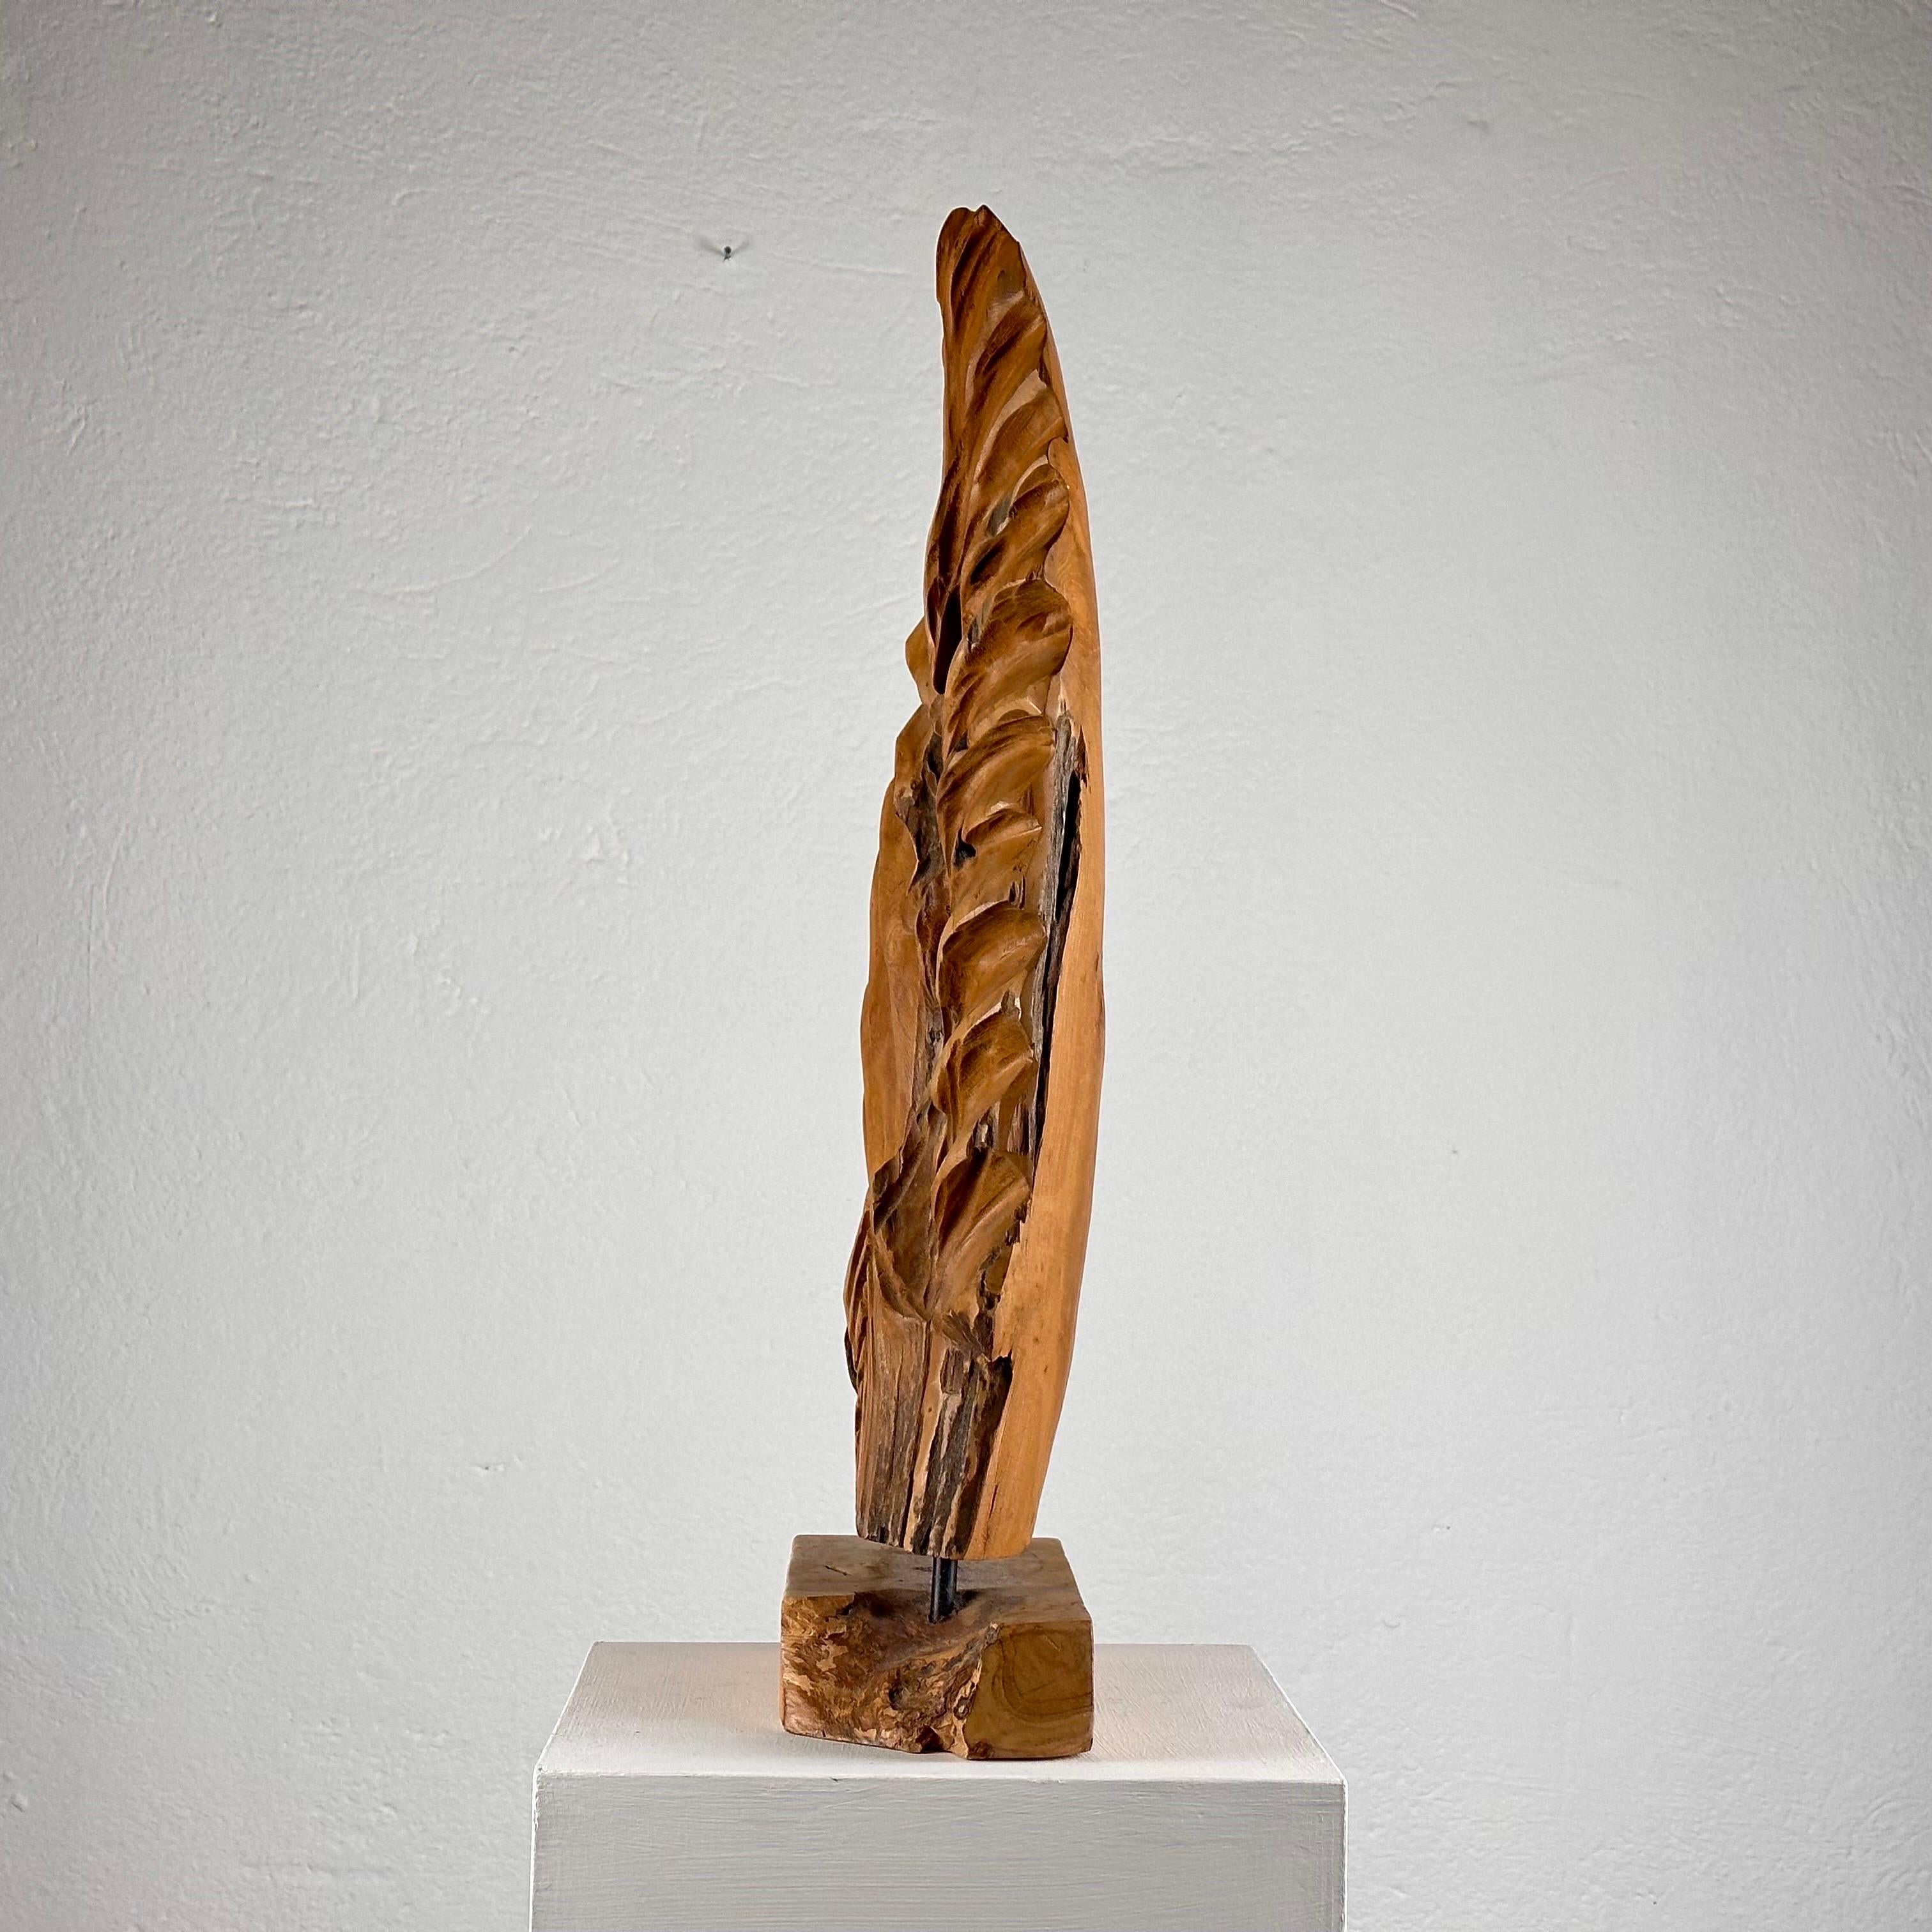 Hand-Carved Exquisite Italian Phytomorphic Abstract Sculpture in Natural Ash, 1960s For Sale